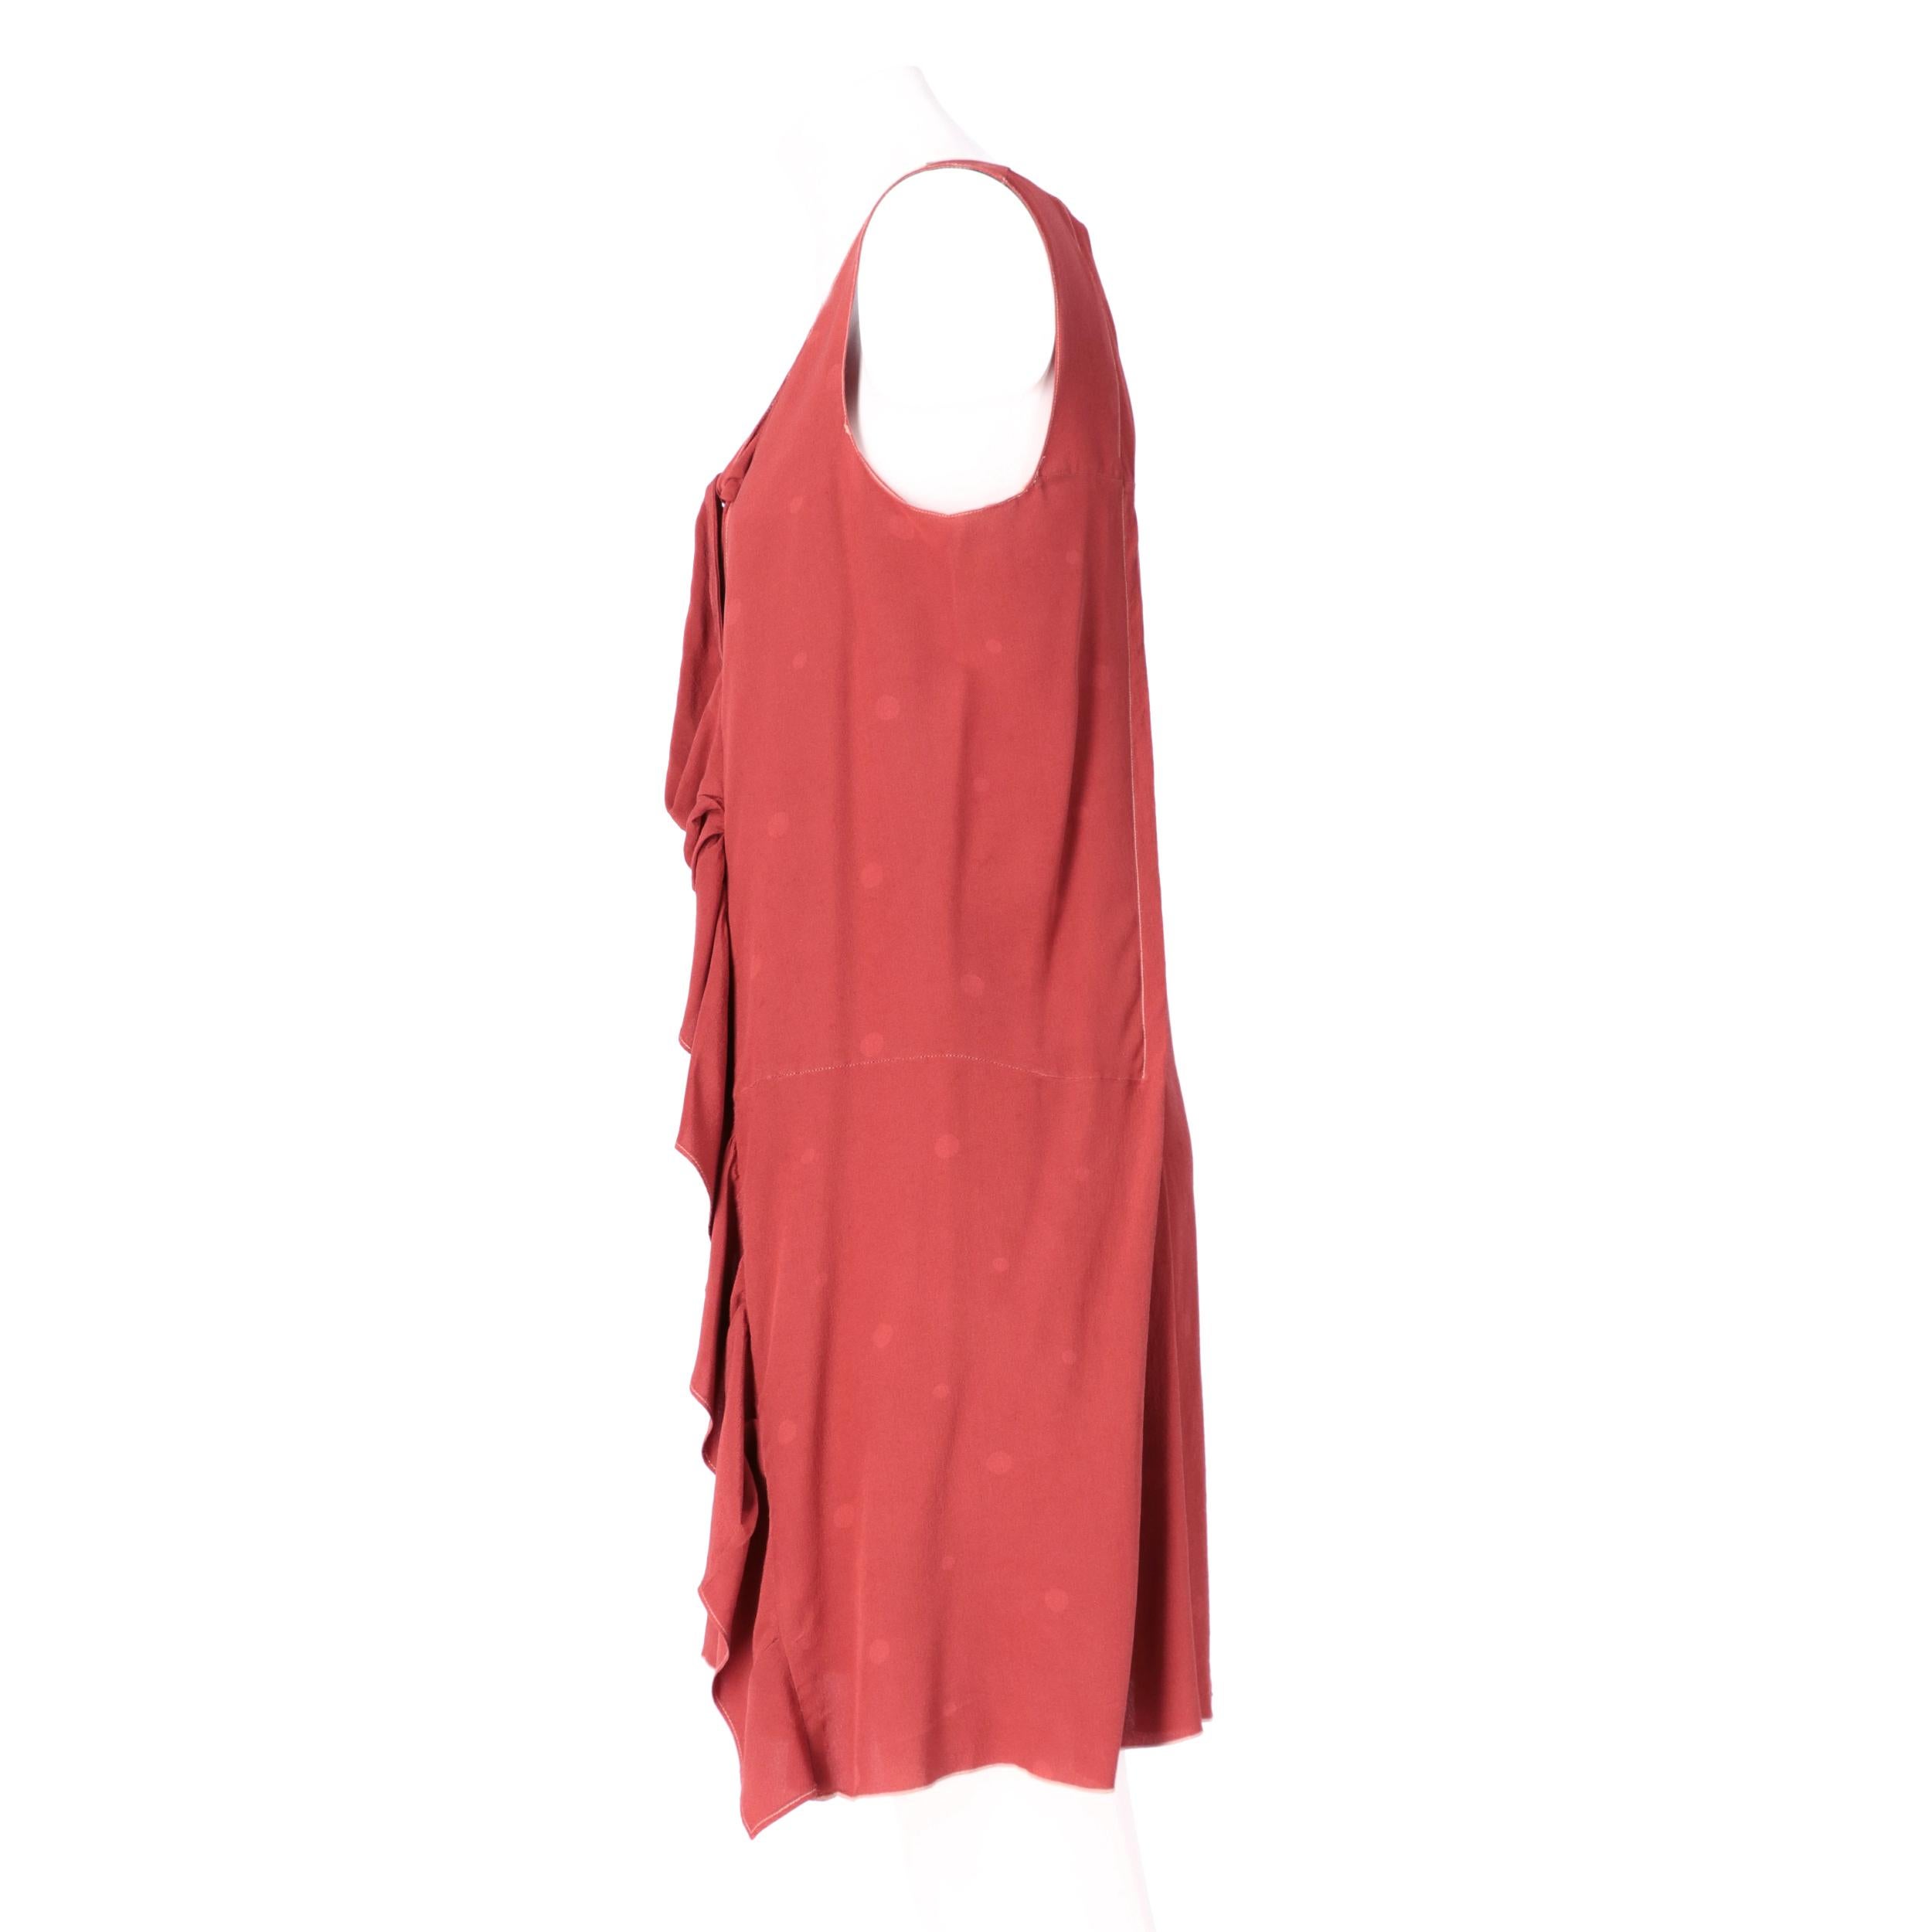 Marni red brick silk dress with tone-on-tone polka dots. Round neckline, sleeveless and decorative knot with drapery.
Years: 2000s

Made in Italy

Size: 42 IT



Flat measurements

Height: 90 cm
Bust: 48 cm